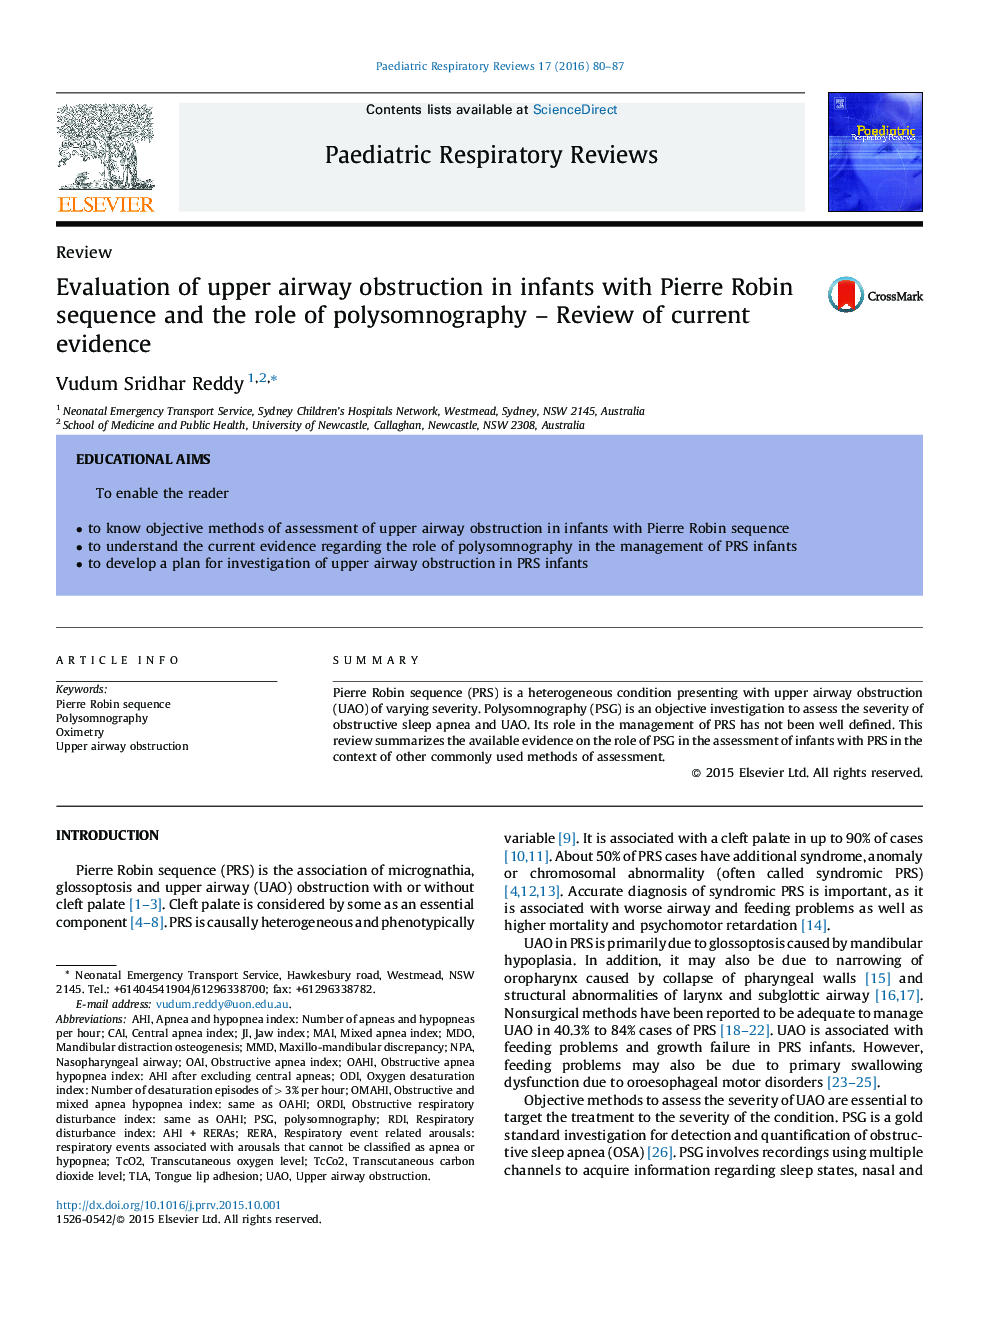 Evaluation of upper airway obstruction in infants with Pierre Robin sequence and the role of polysomnography – Review of current evidence